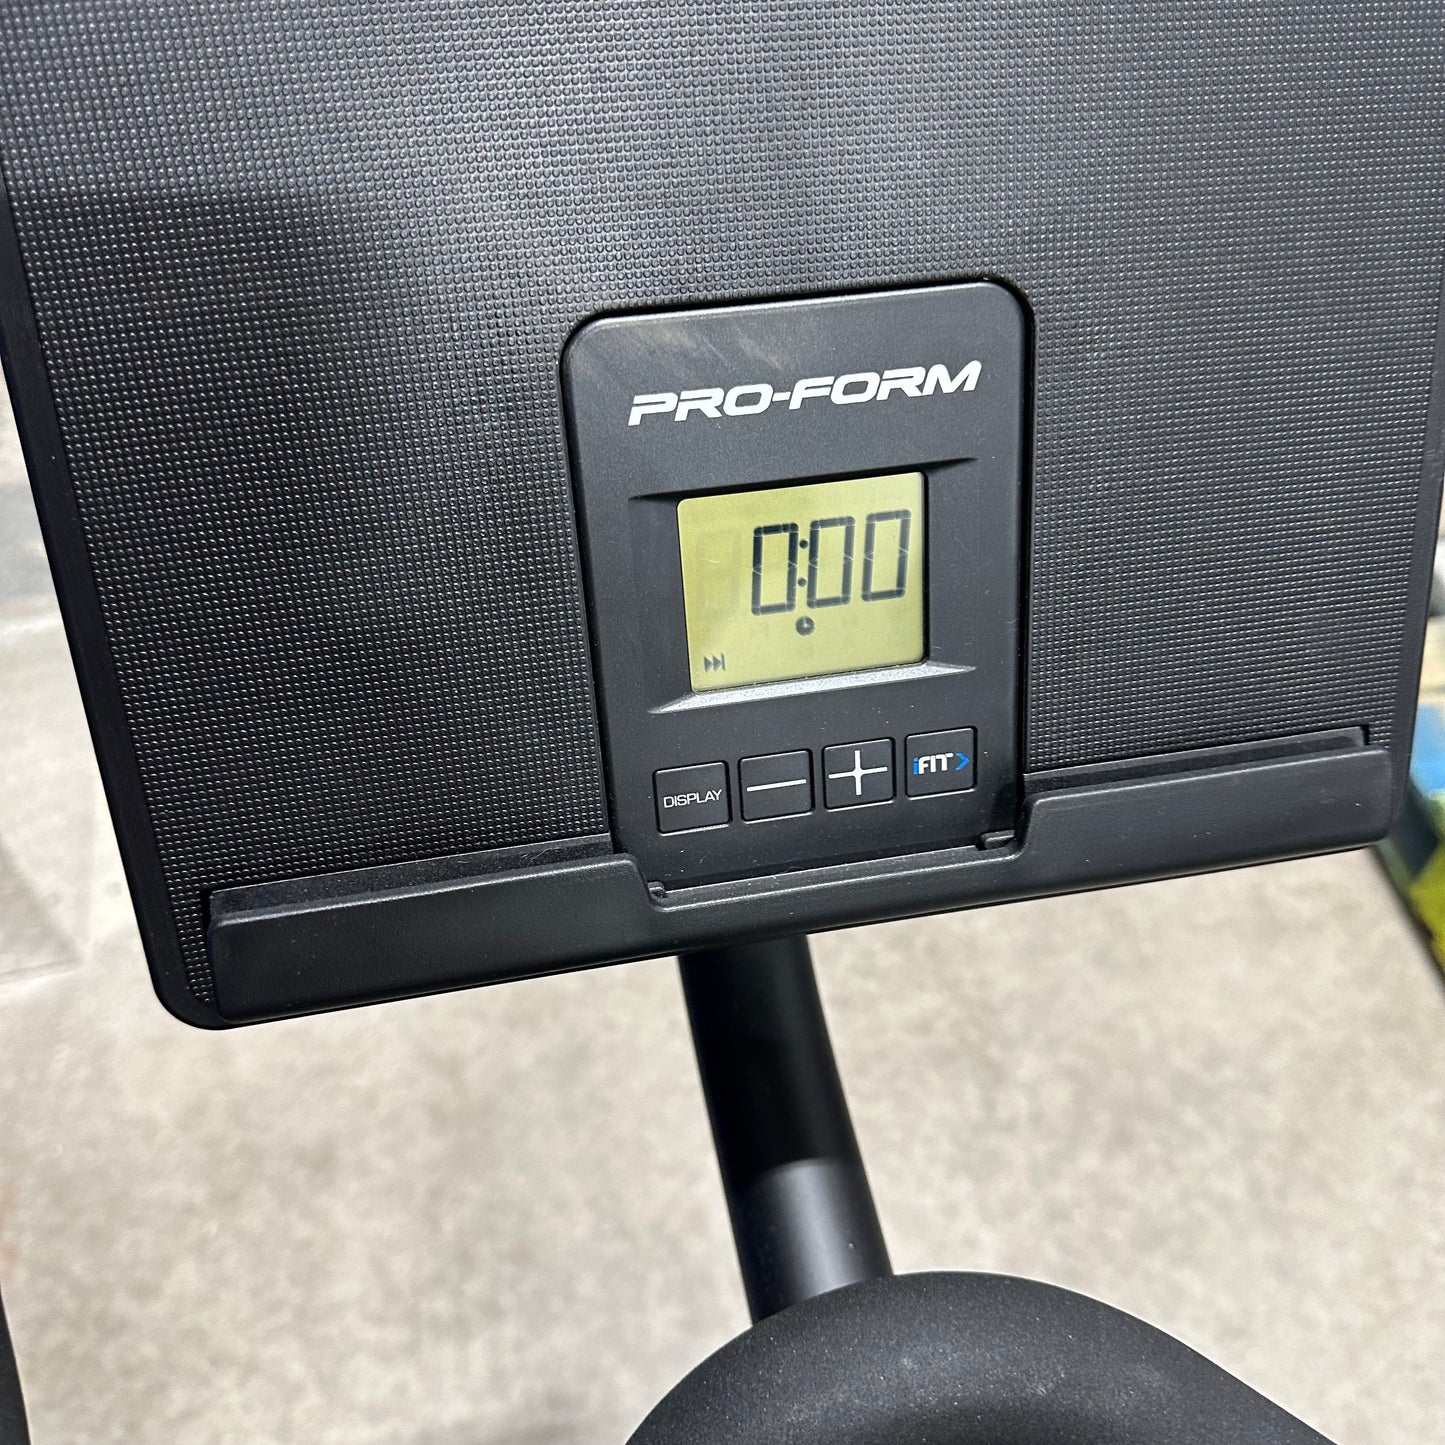 Proform Tour De France CBC Exercise Spin Bike with Tablet Holder (2nd) - iFit membership required